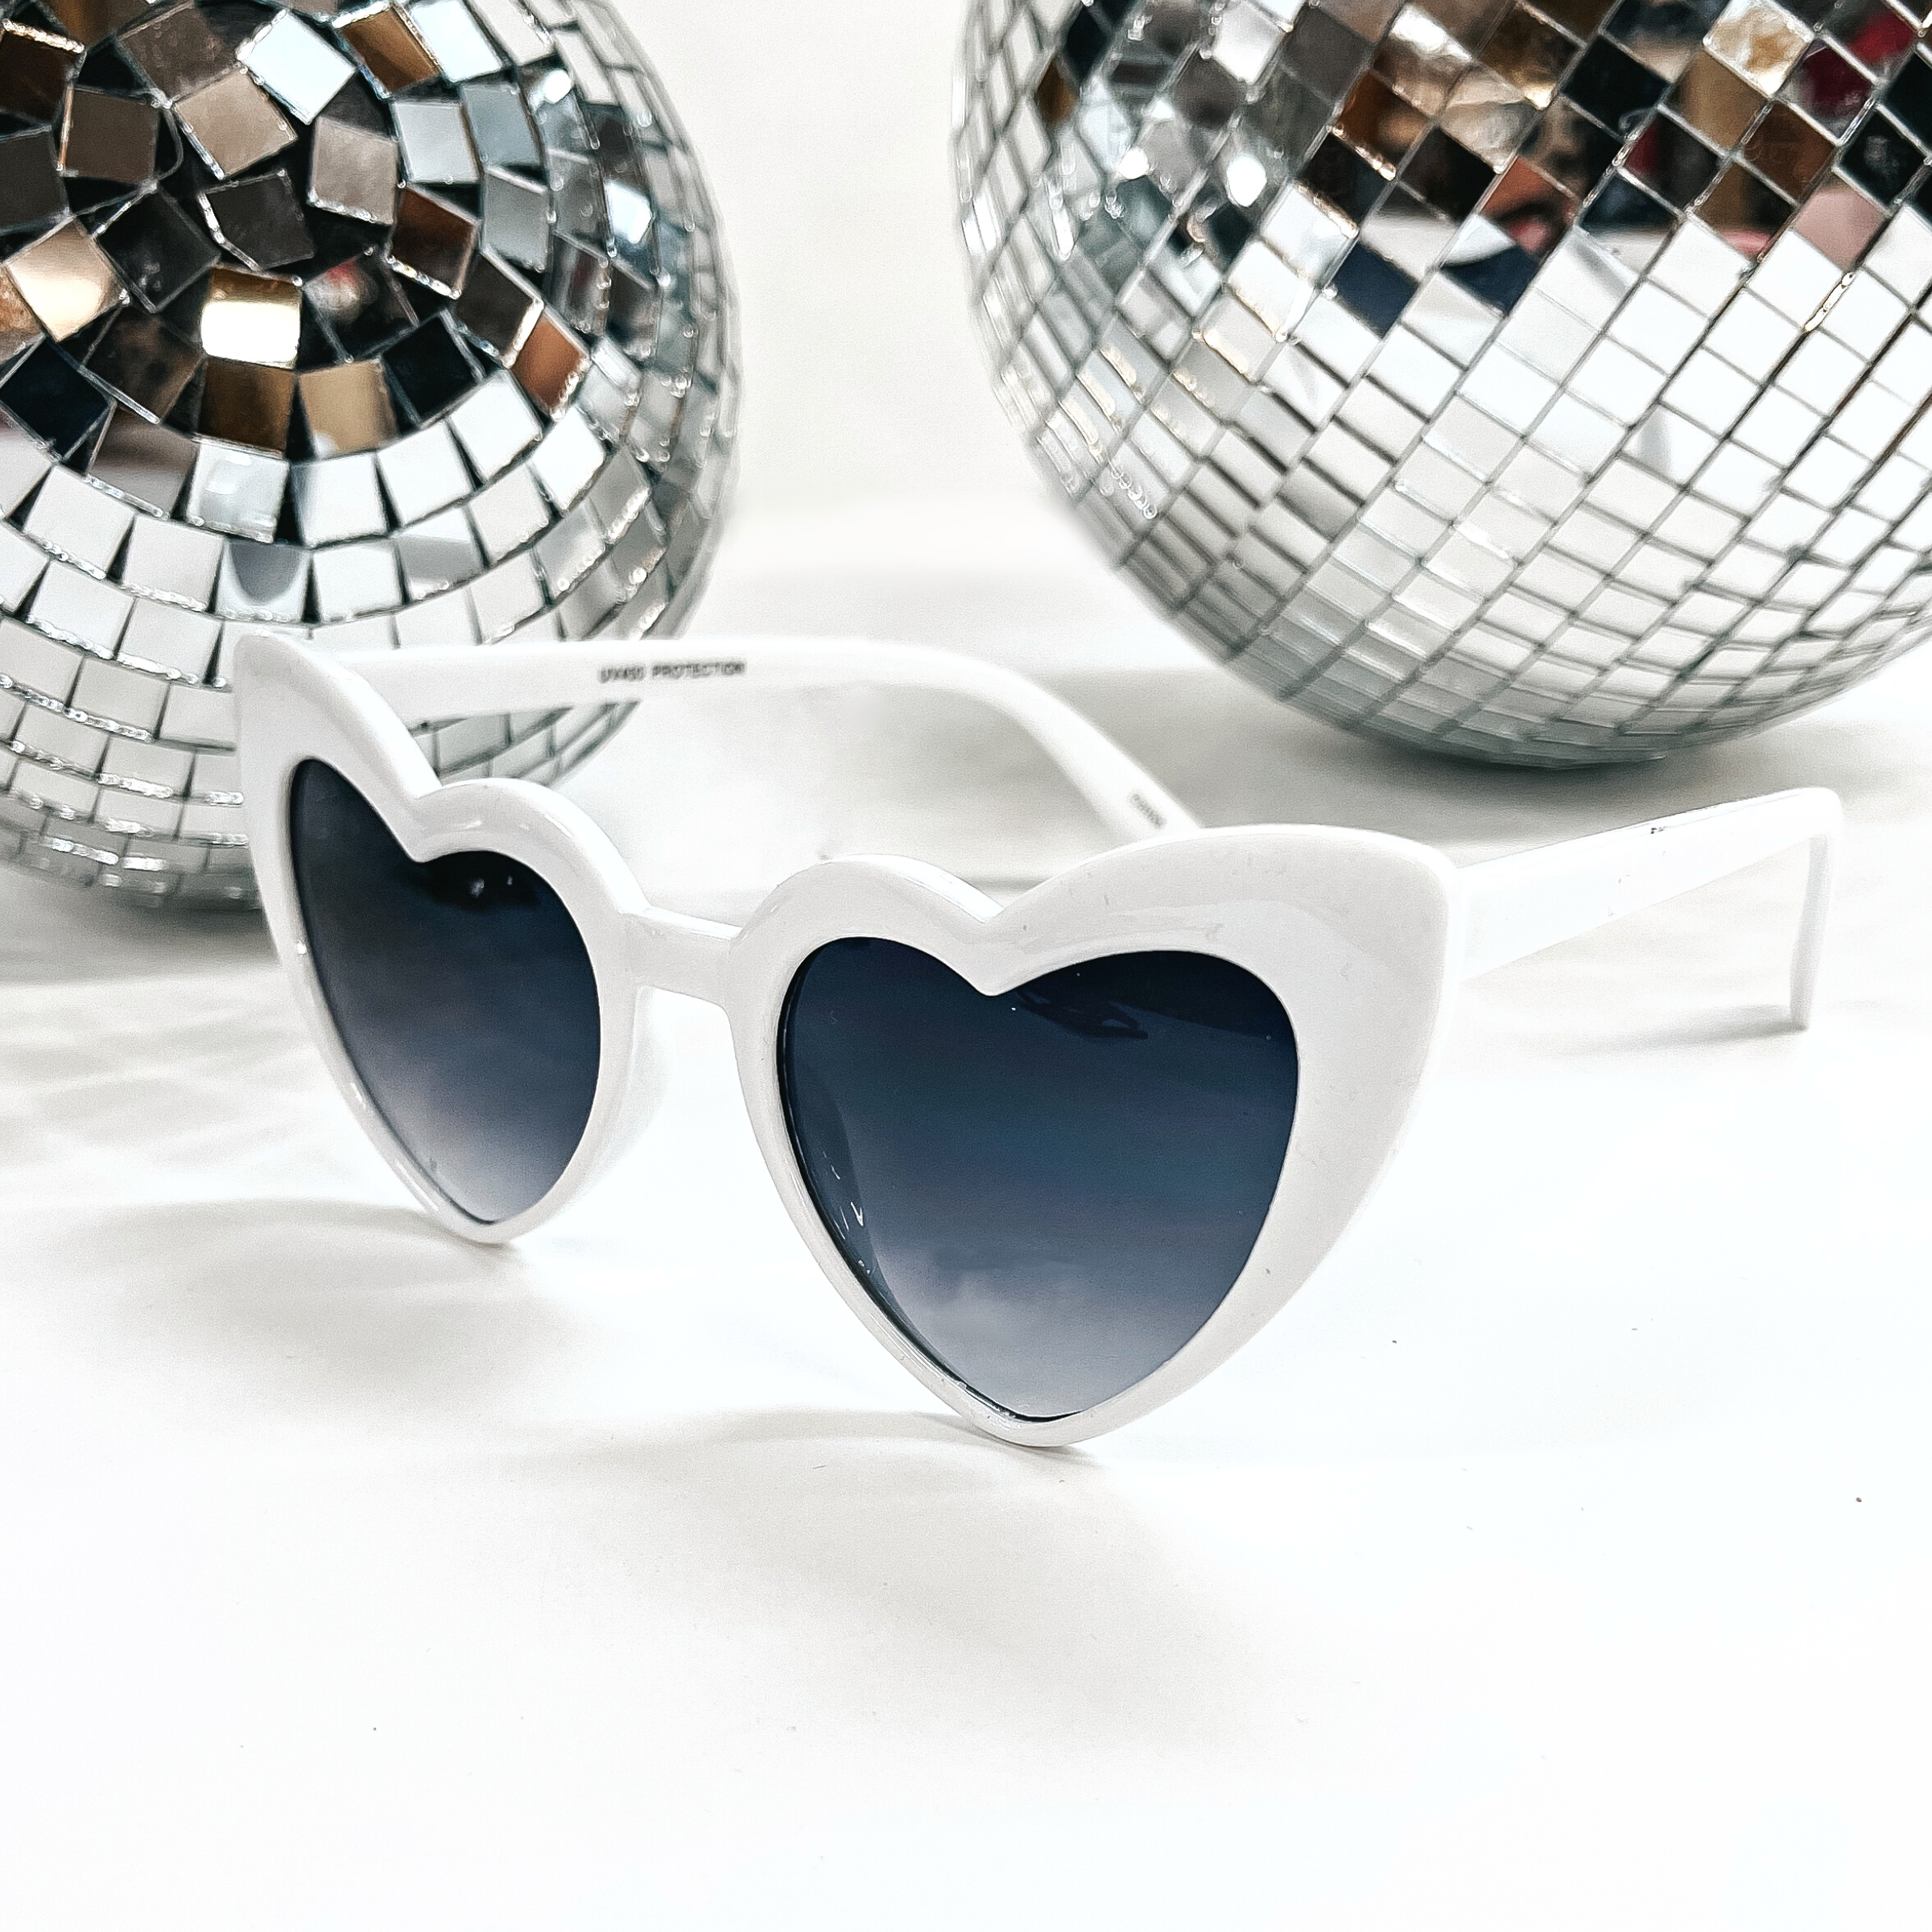 These are heart shaped white sunglasses with a black/dark grey lenses. These sunglasses are taken on a white background with two silver disco balls in the back as decor.